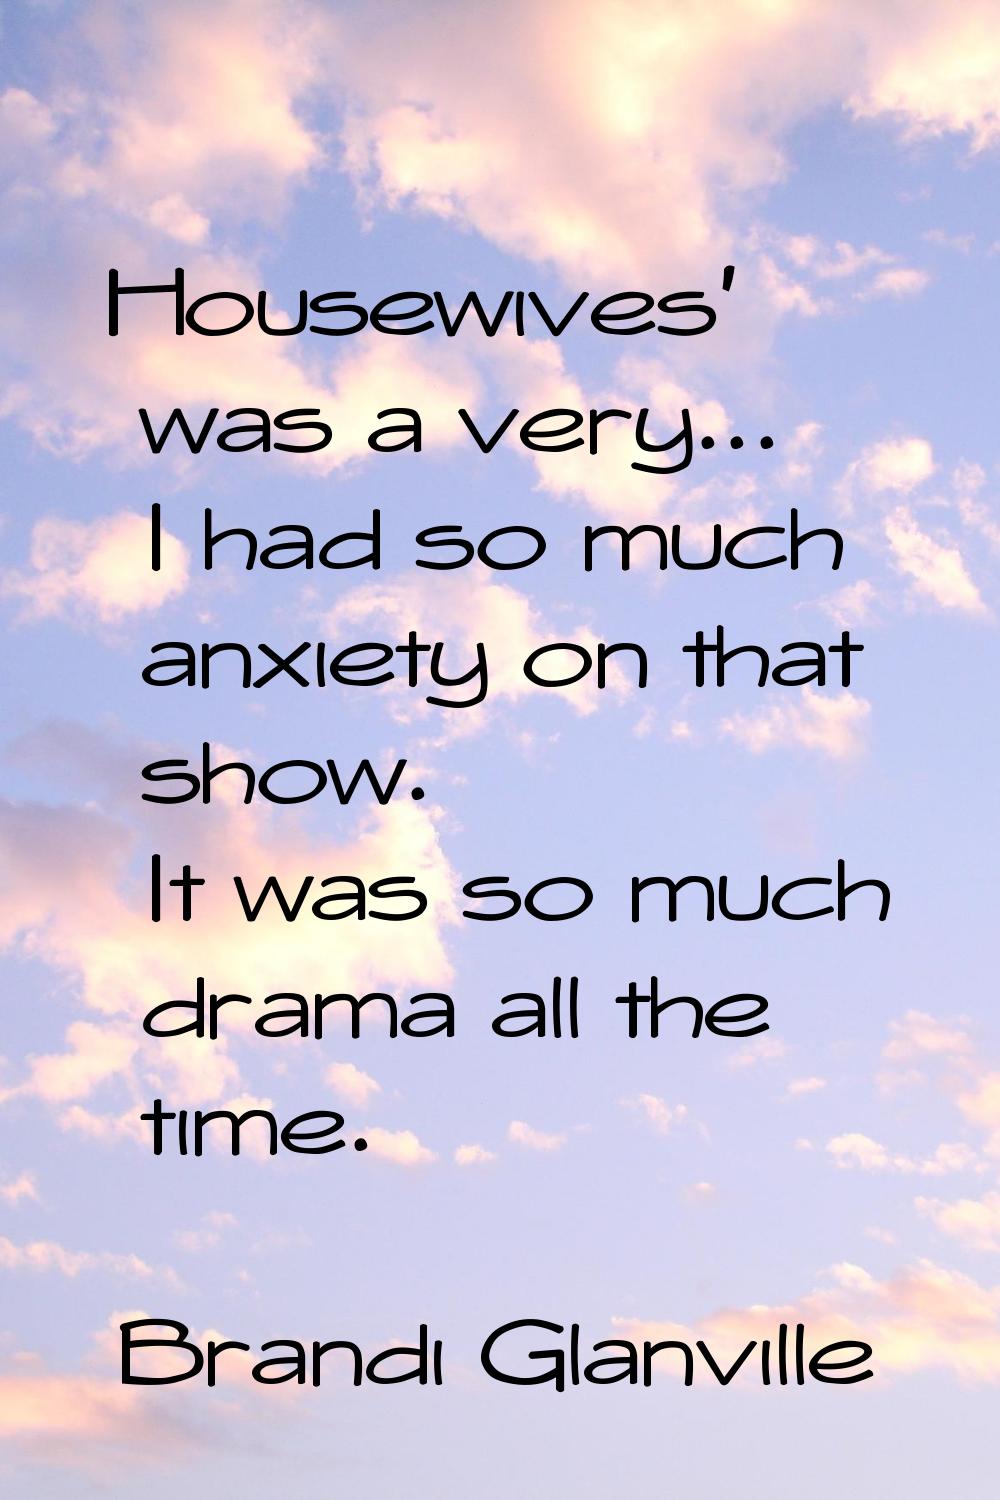 Housewives' was a very... I had so much anxiety on that show. It was so much drama all the time.